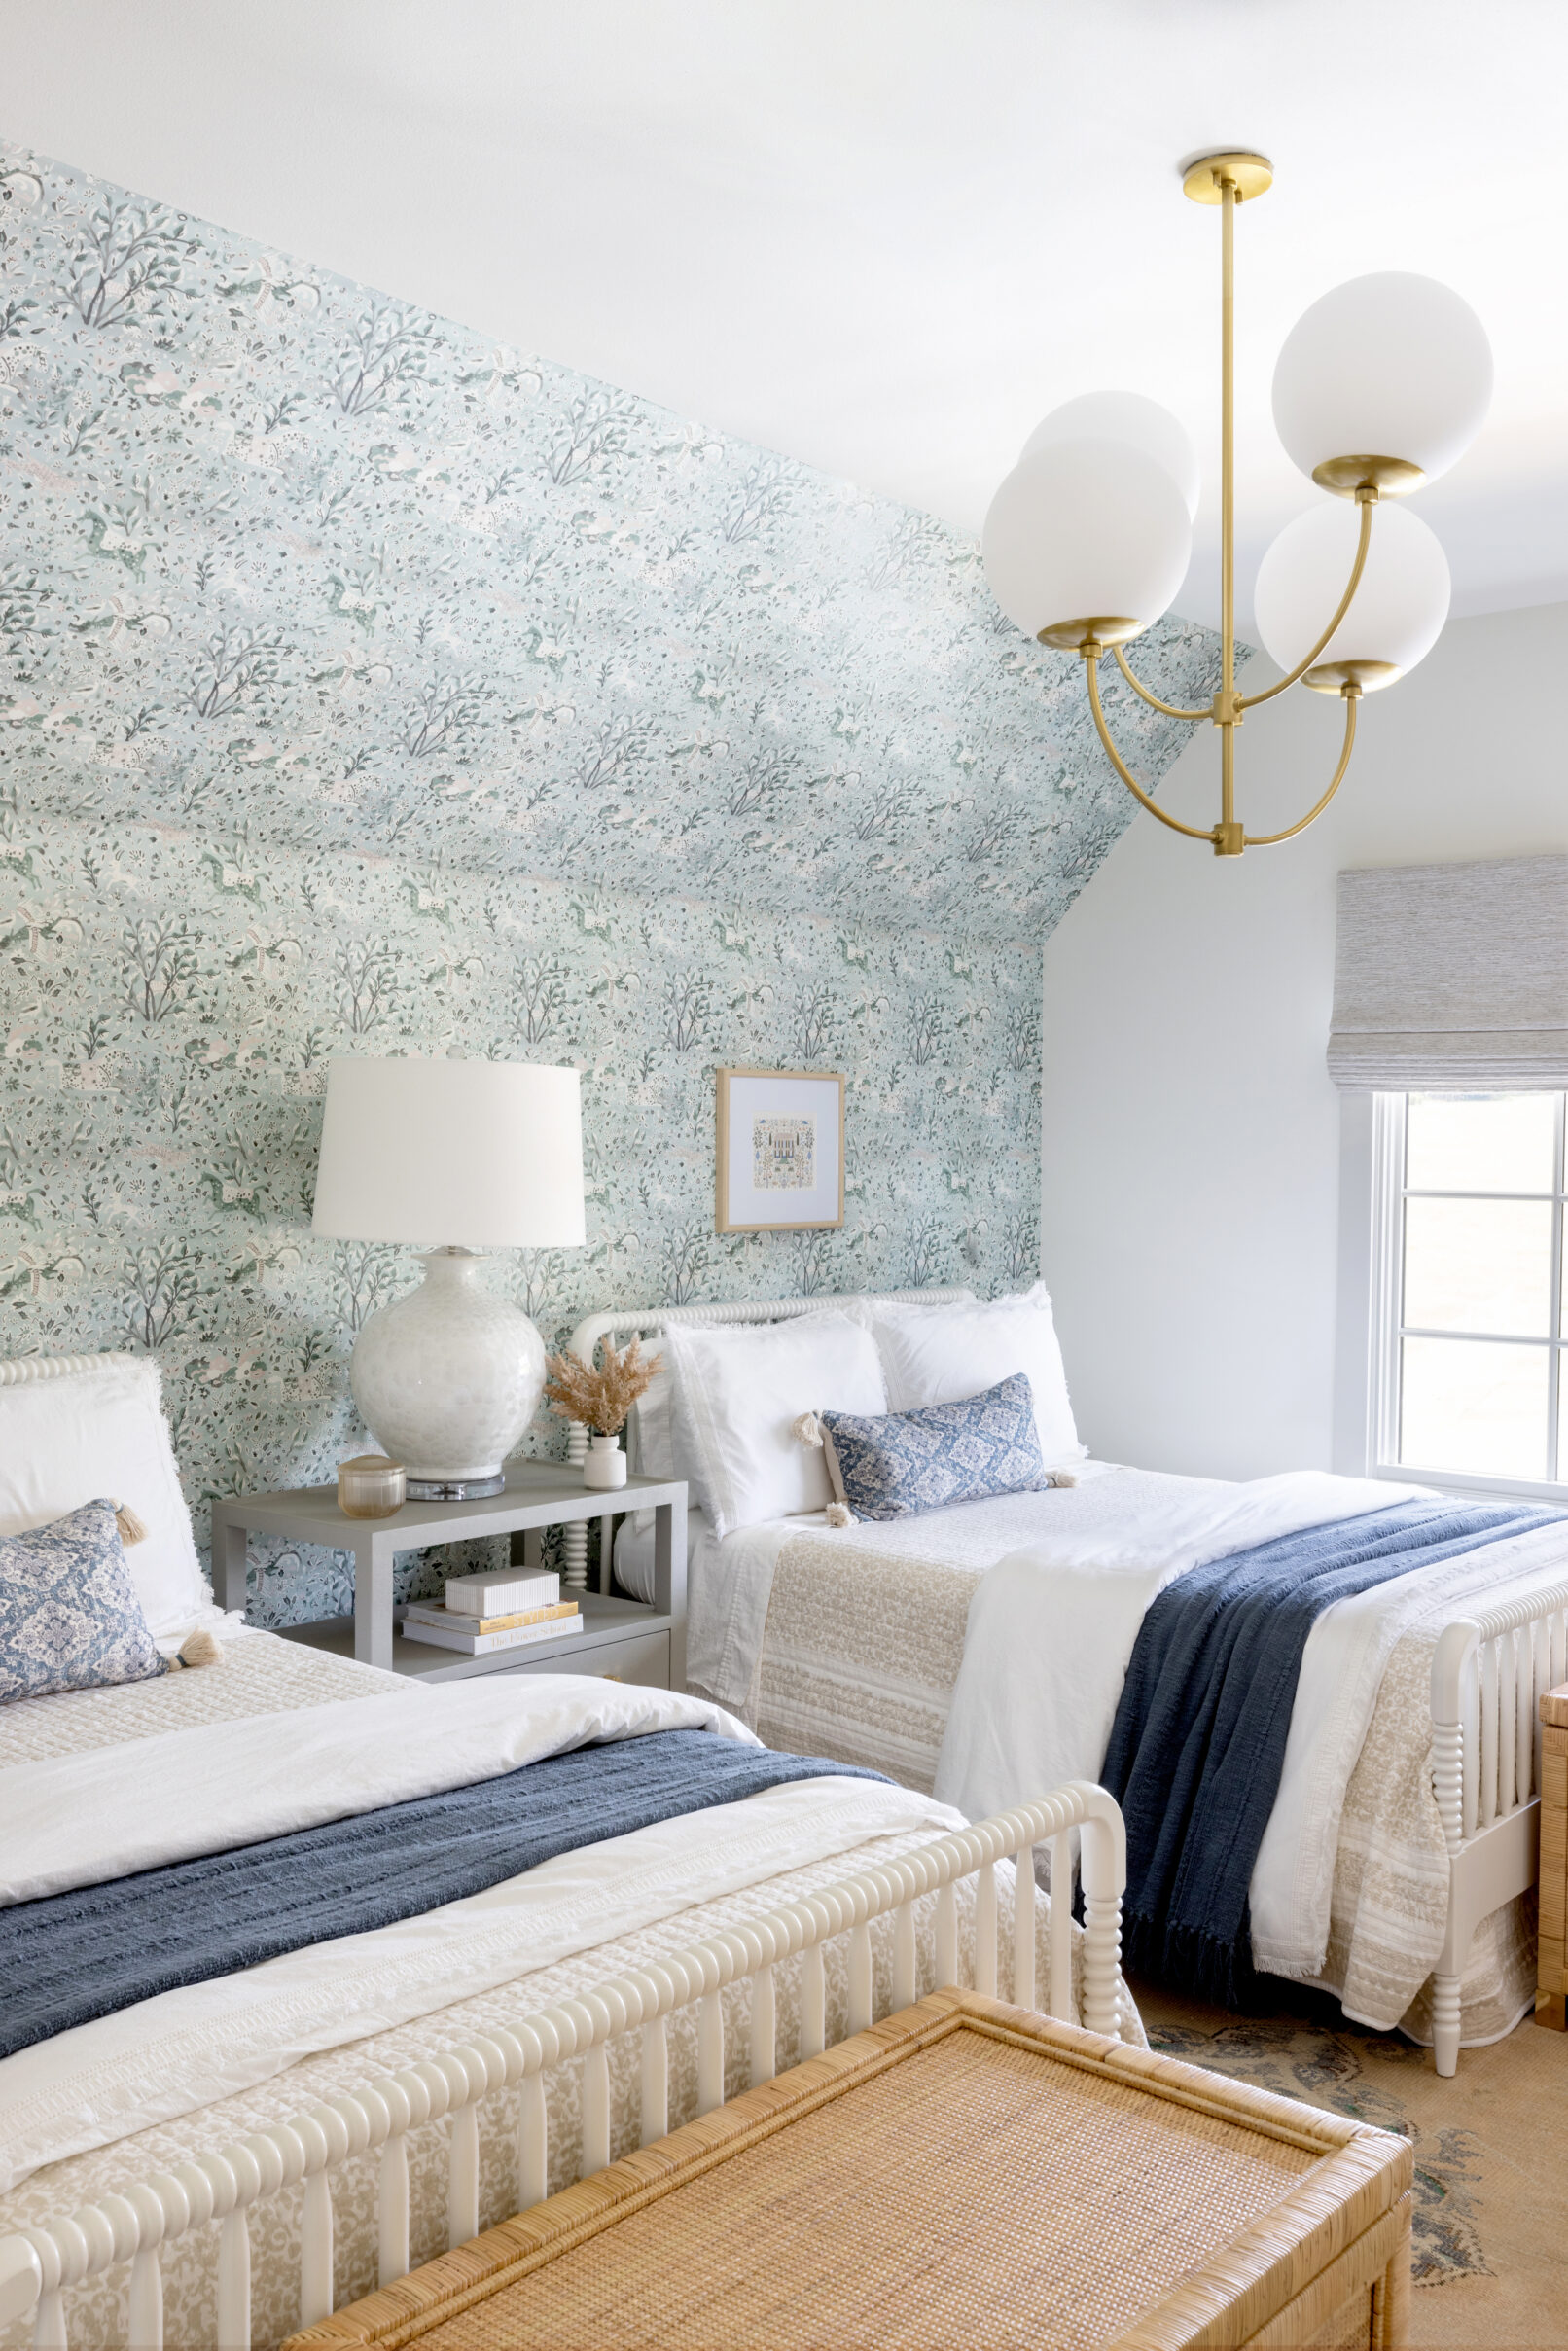 Interior photography of A child’s bedroom with blue floral wall paper, white bedding and a gold light fixture.